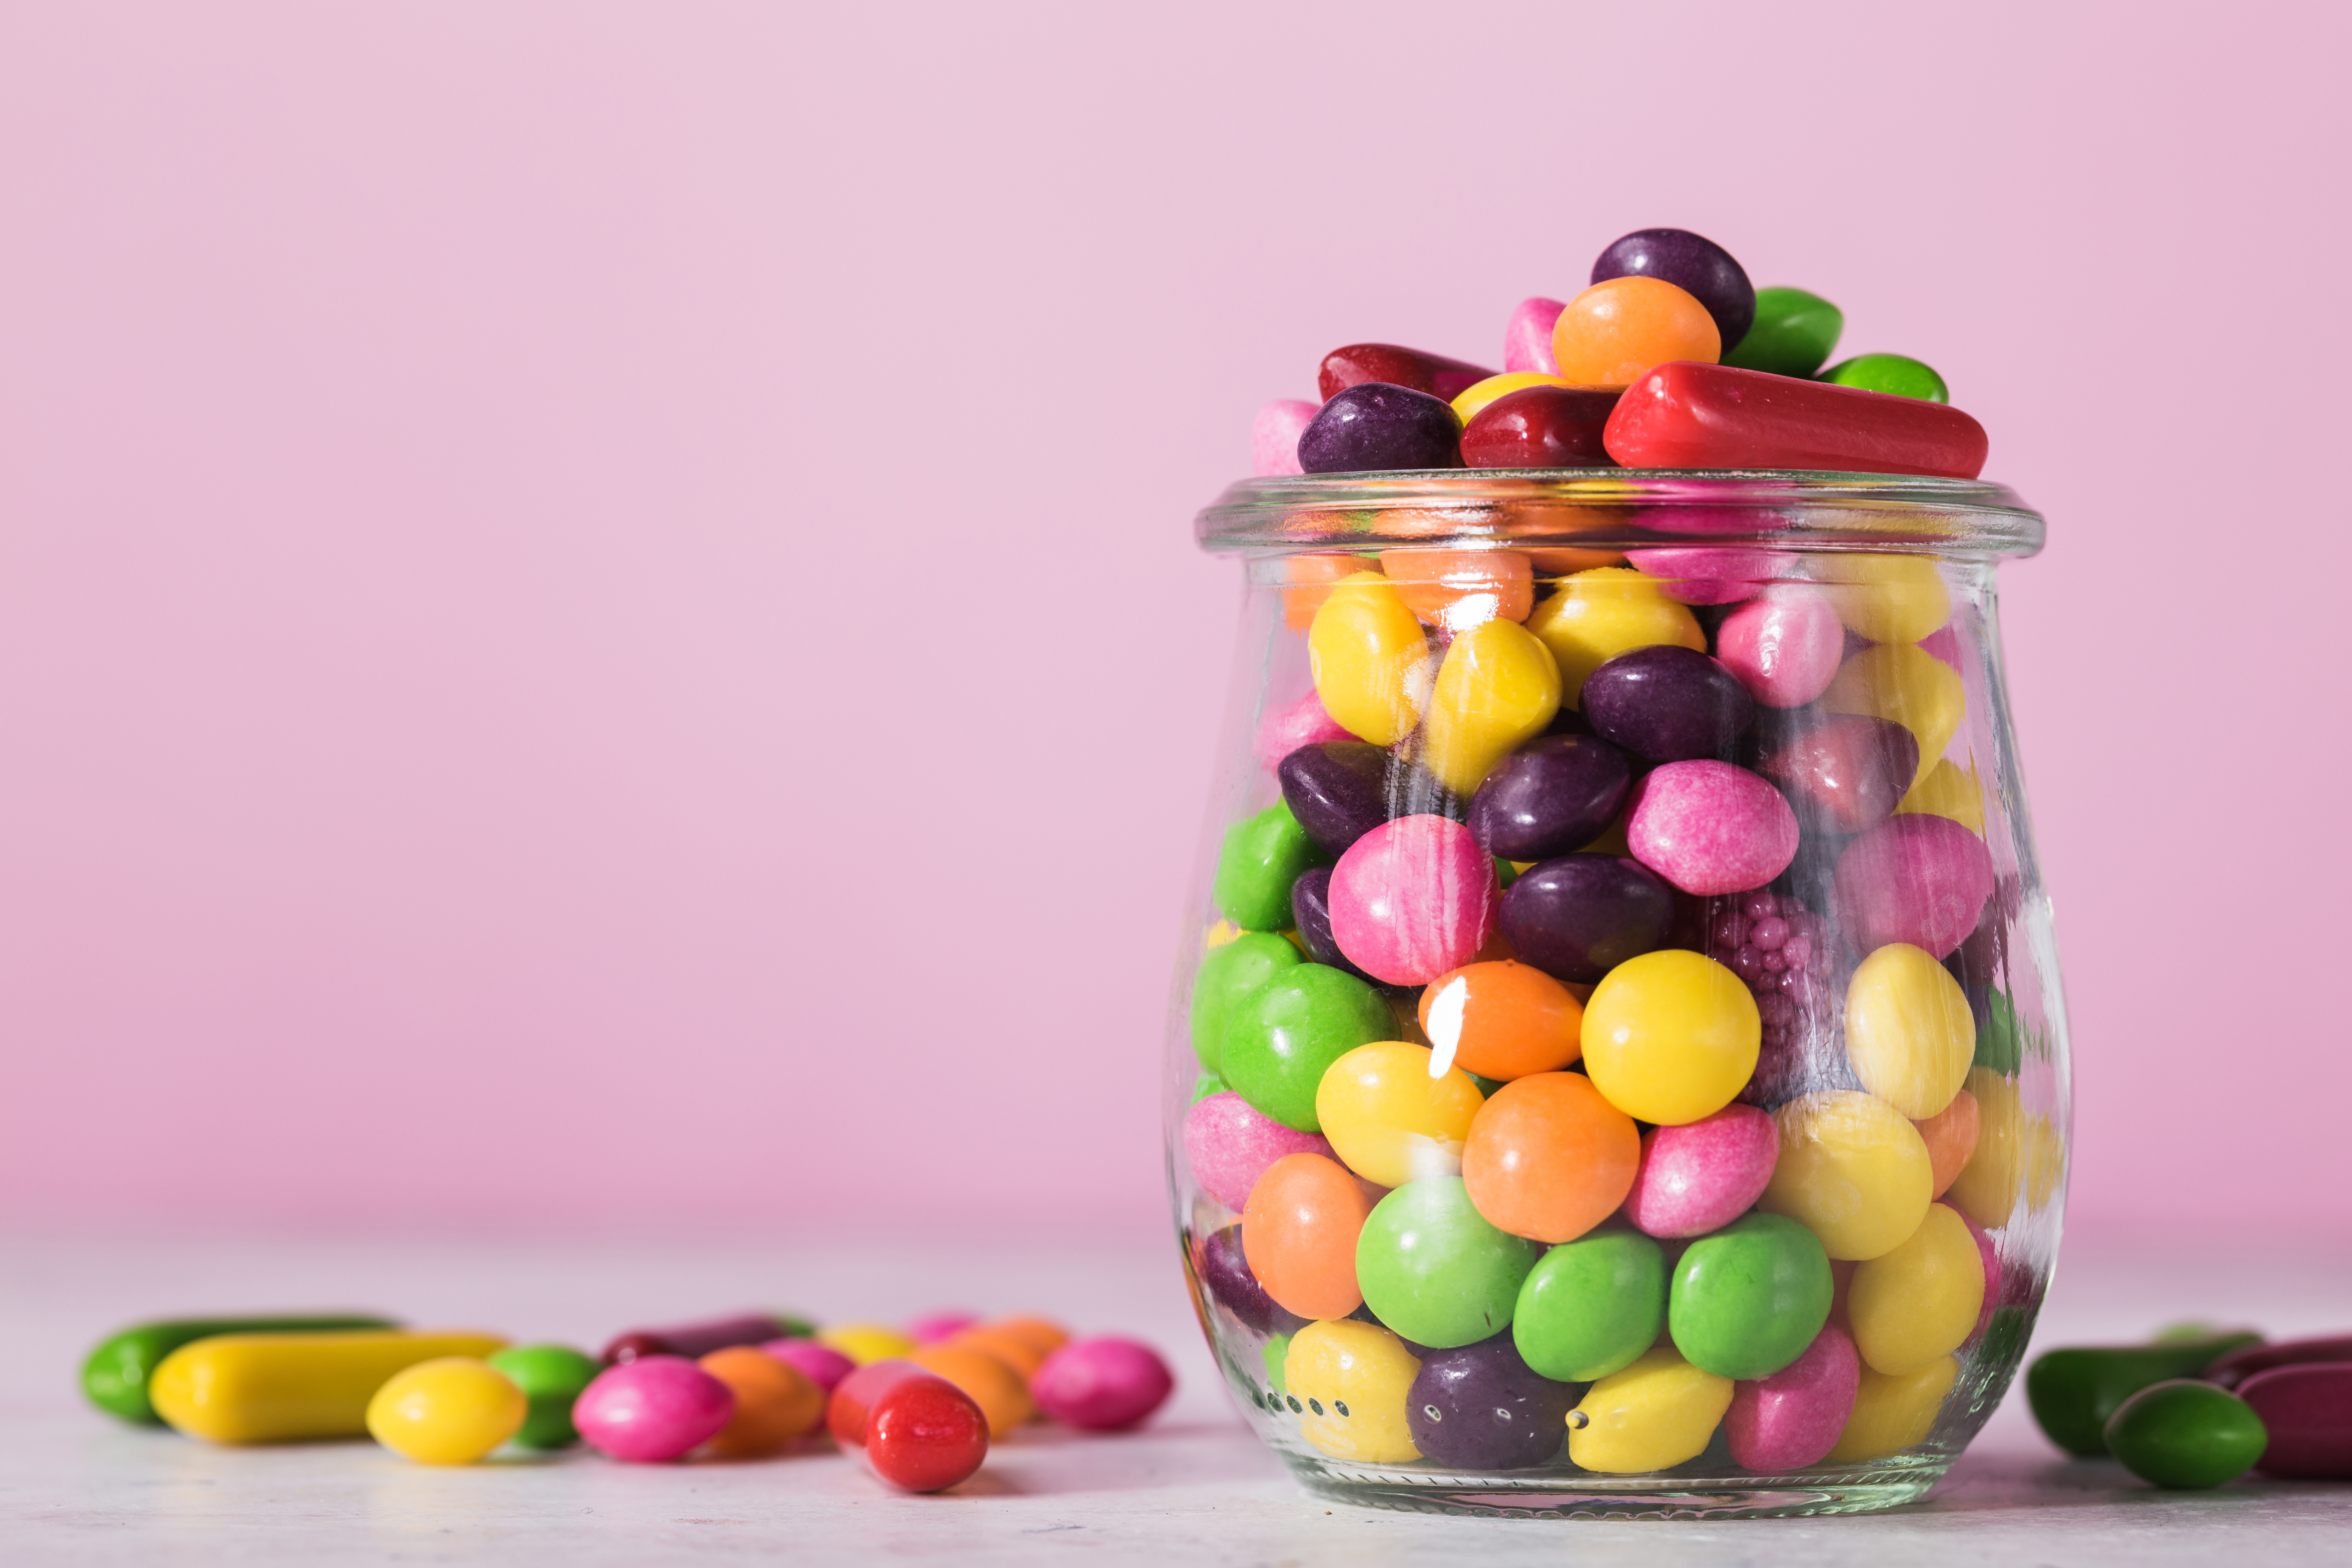 Candy Jar Sweets 5472x3648